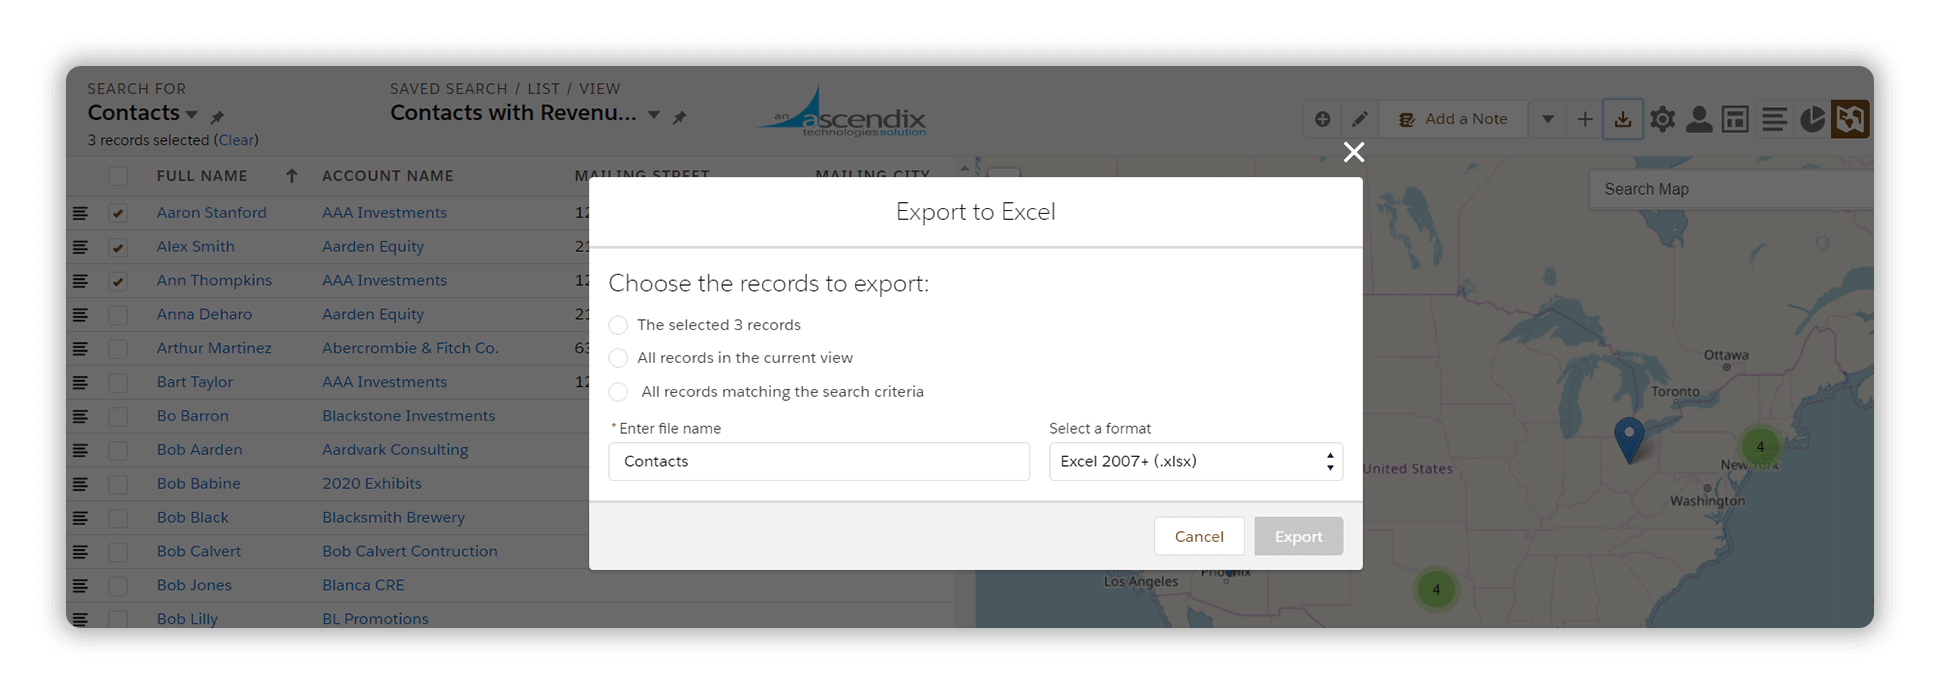 Ascendix-Search-Exporting-accounts-from-Salesforce-to-Excel